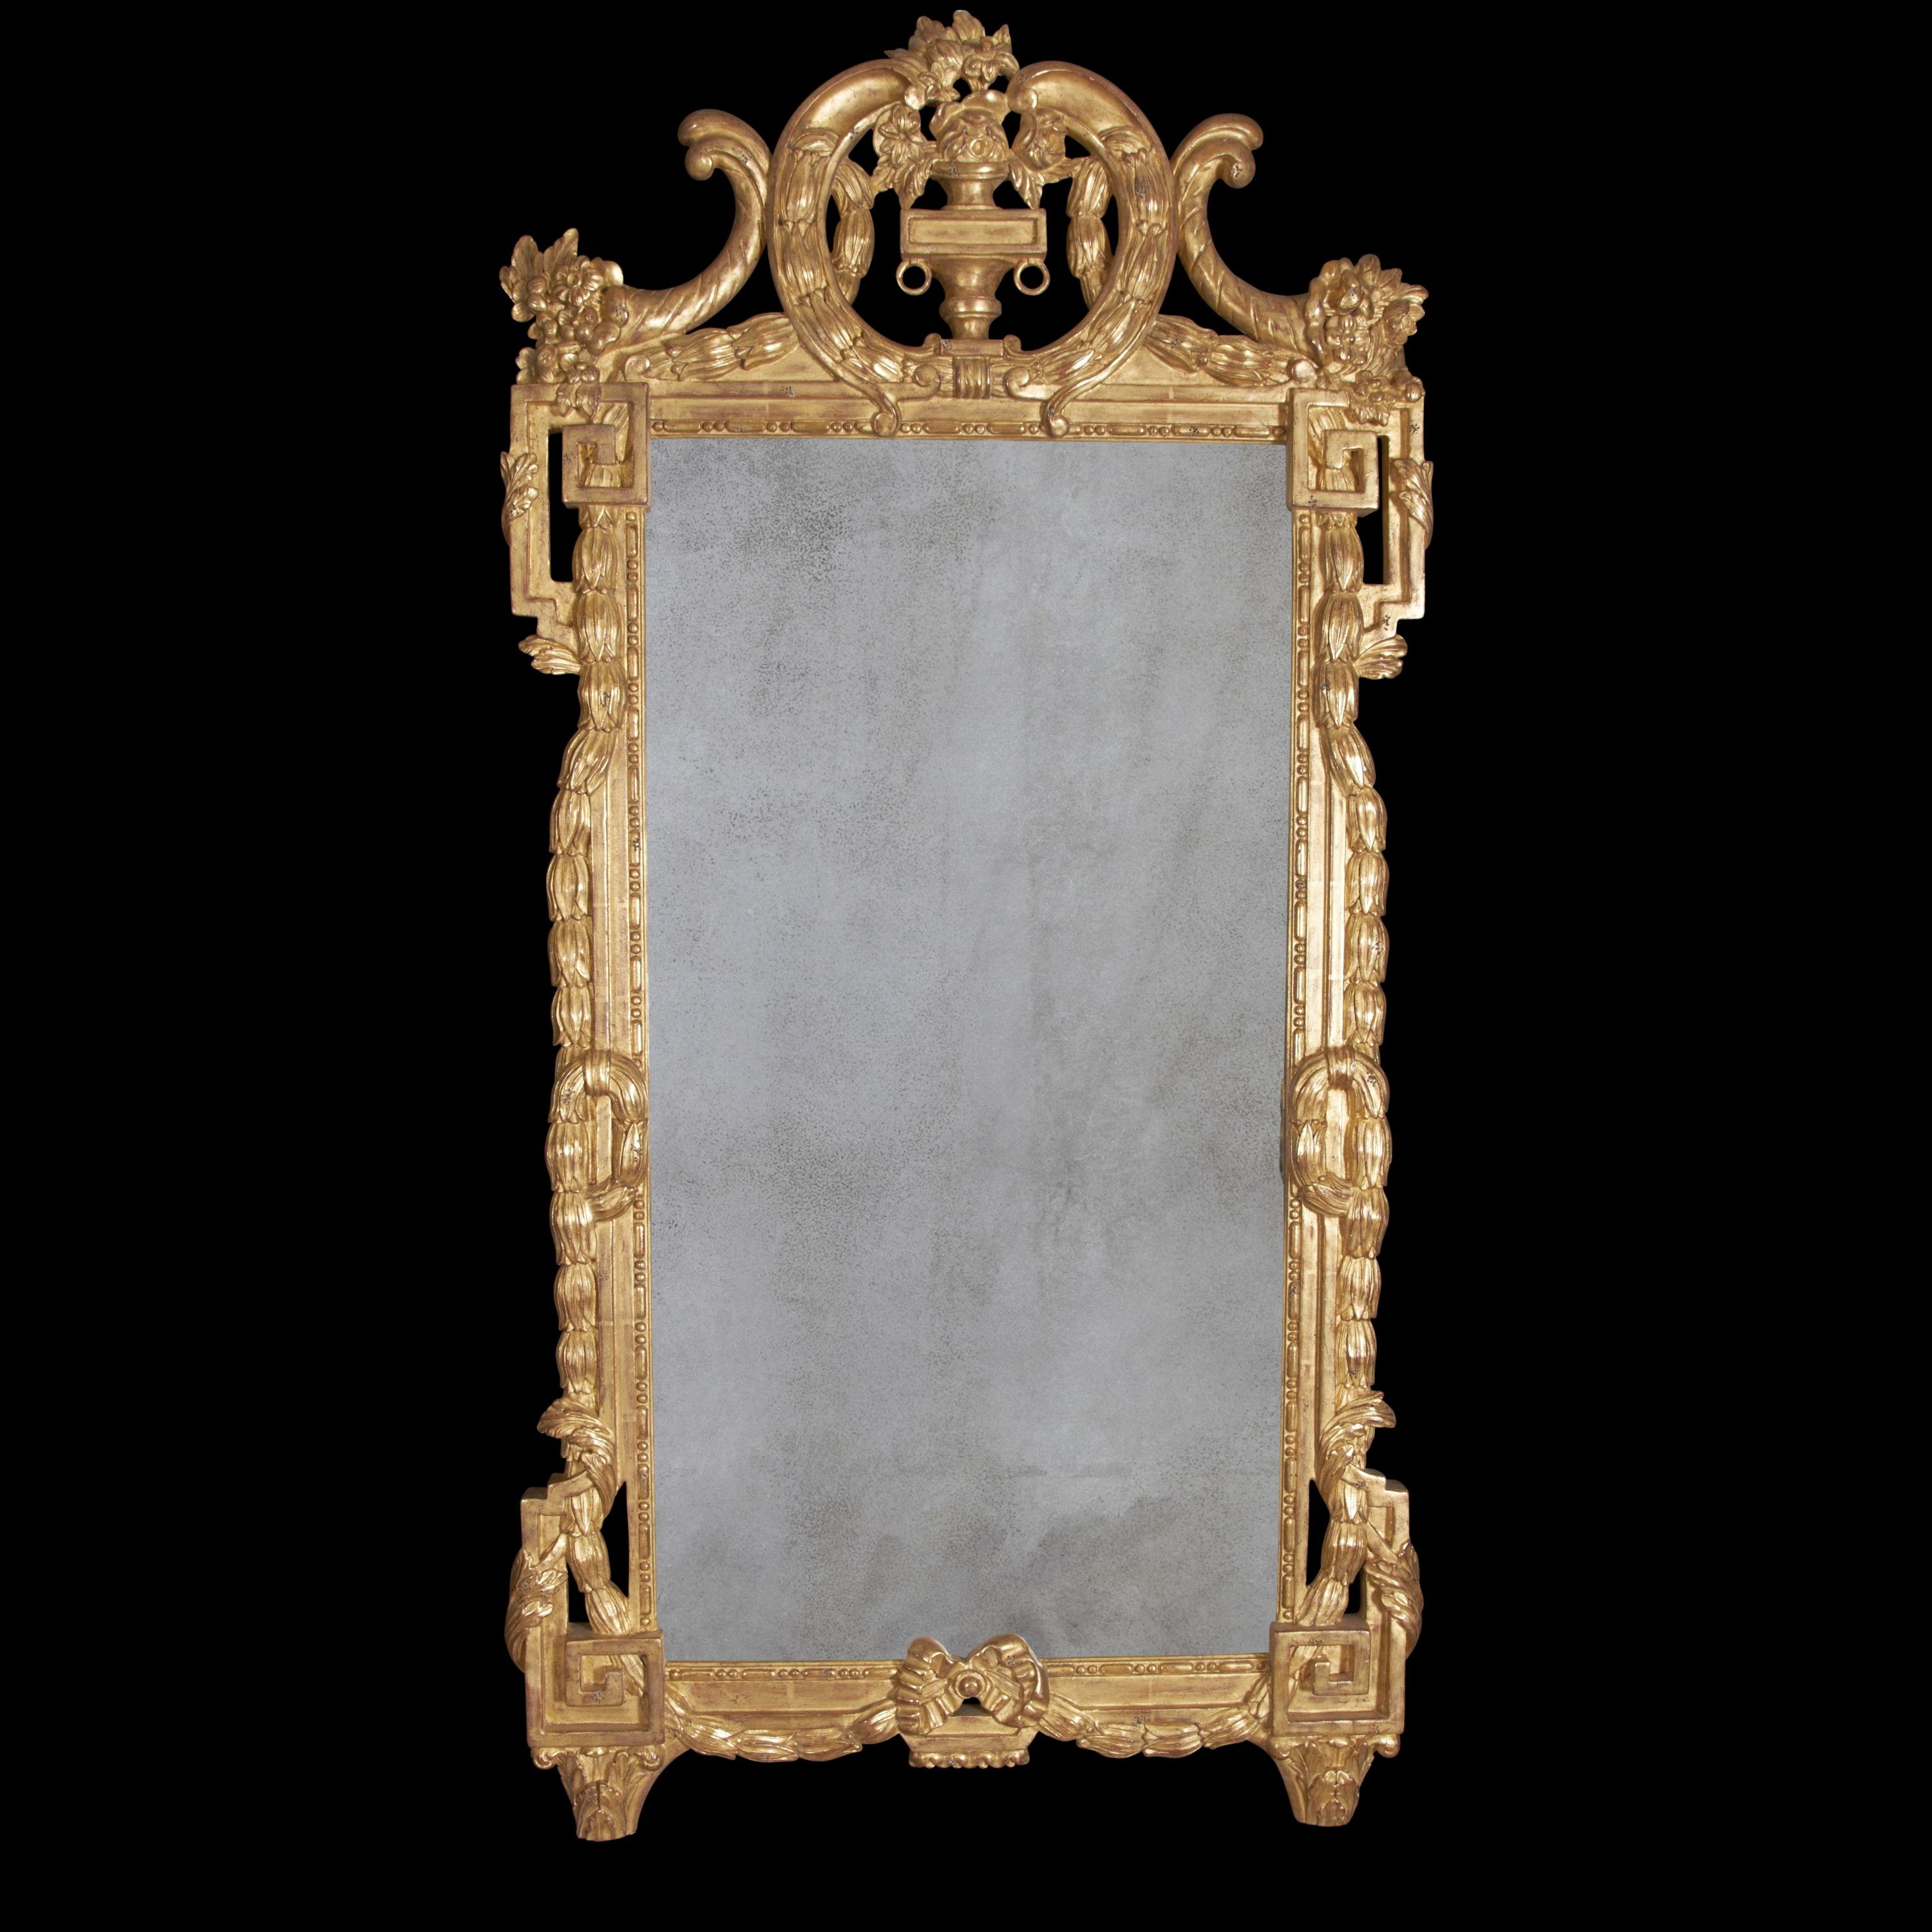 Home Decor Fascinating Antique Mirror Images Design Inspirations Within Antiqued Mirrors For Sale (Photo 7 of 15)